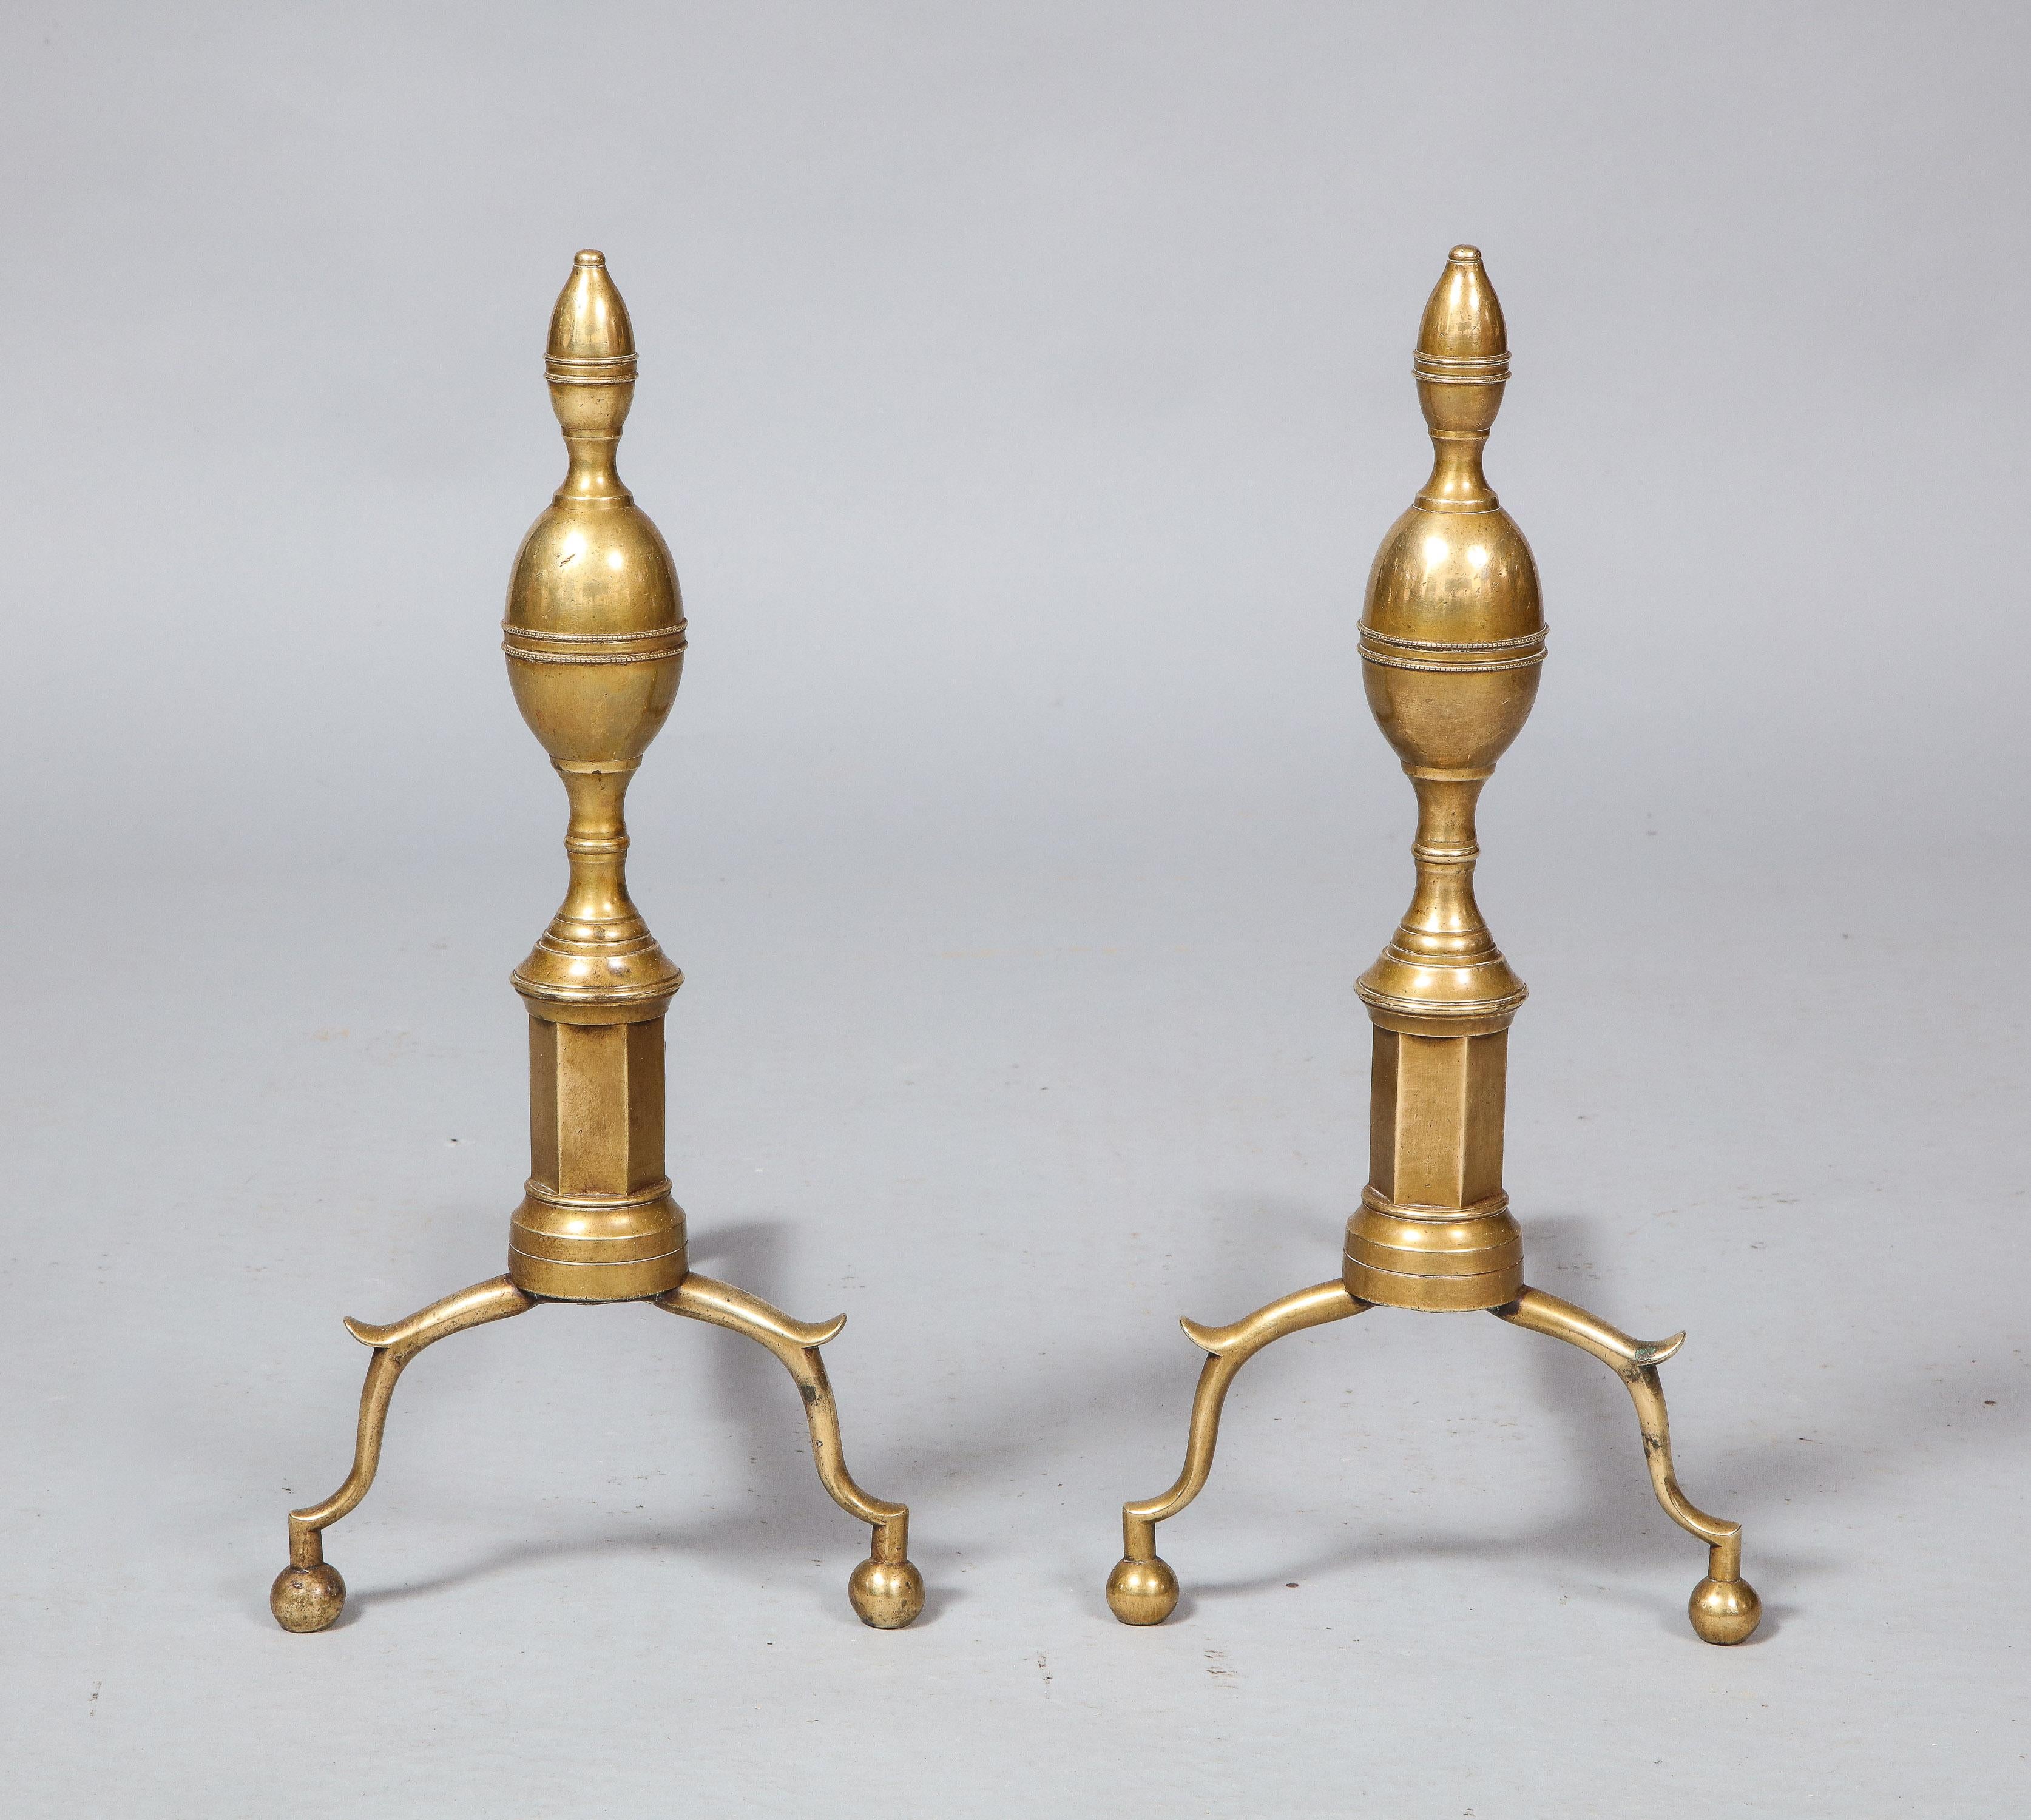 Good pair of early 19th century brass andirons having double lemon finials with ringed collars, over octagonal shafts and standing on scrolled legs with knee spurs and standing on ball feet, with original wrought iron supports.